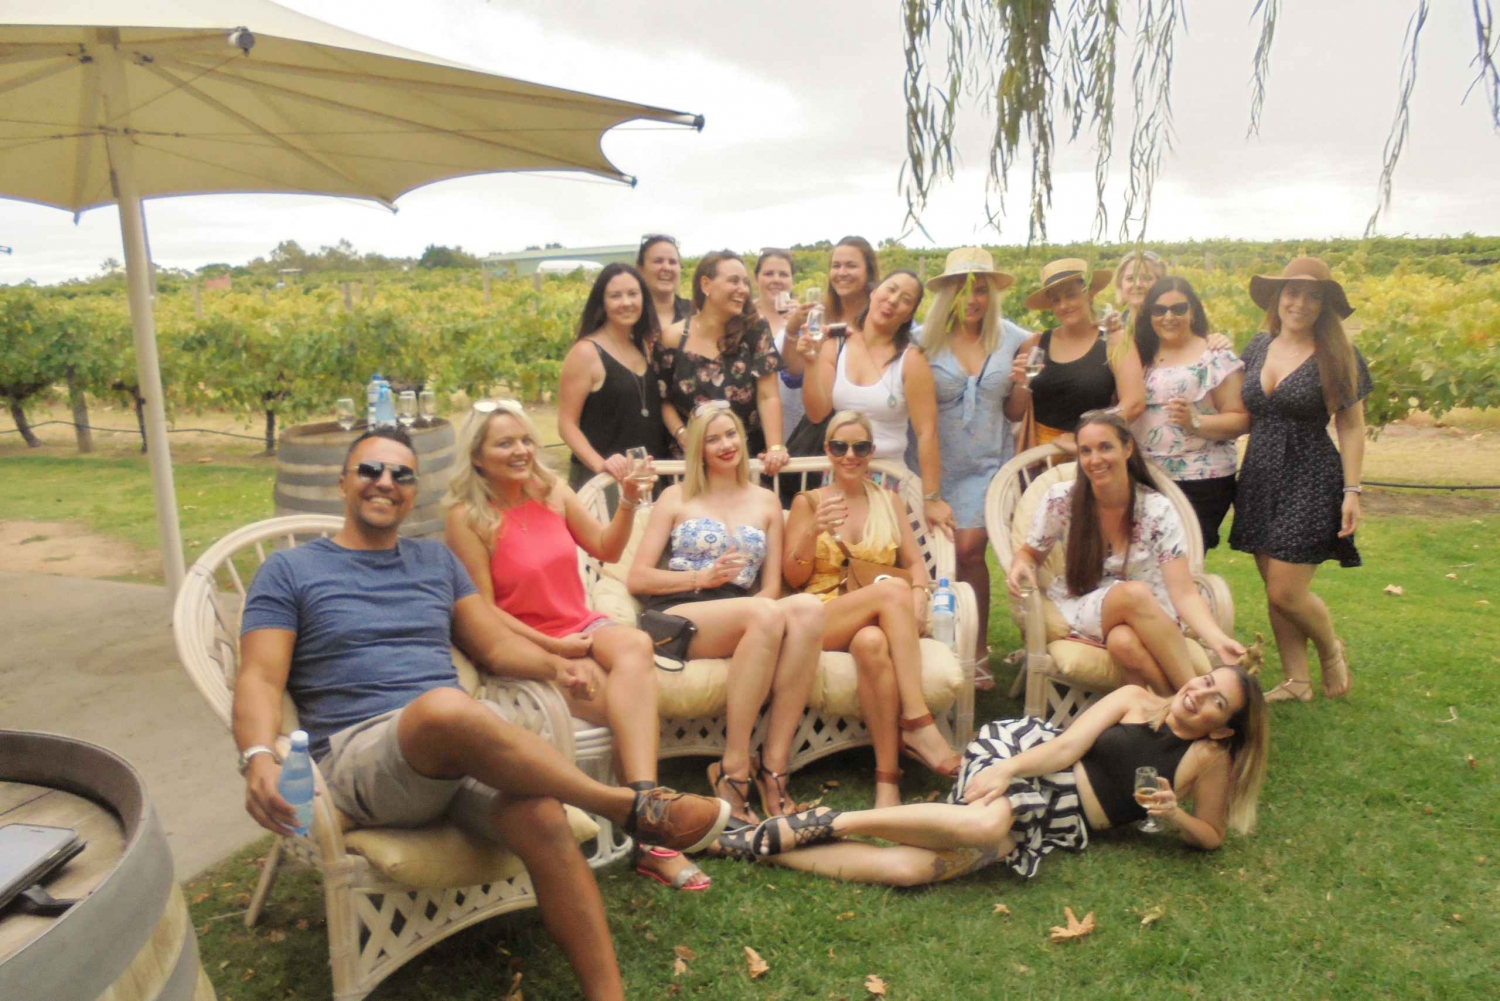 From Perth: Guildford Town & Swan Valley Wine Tour w/ Cruise